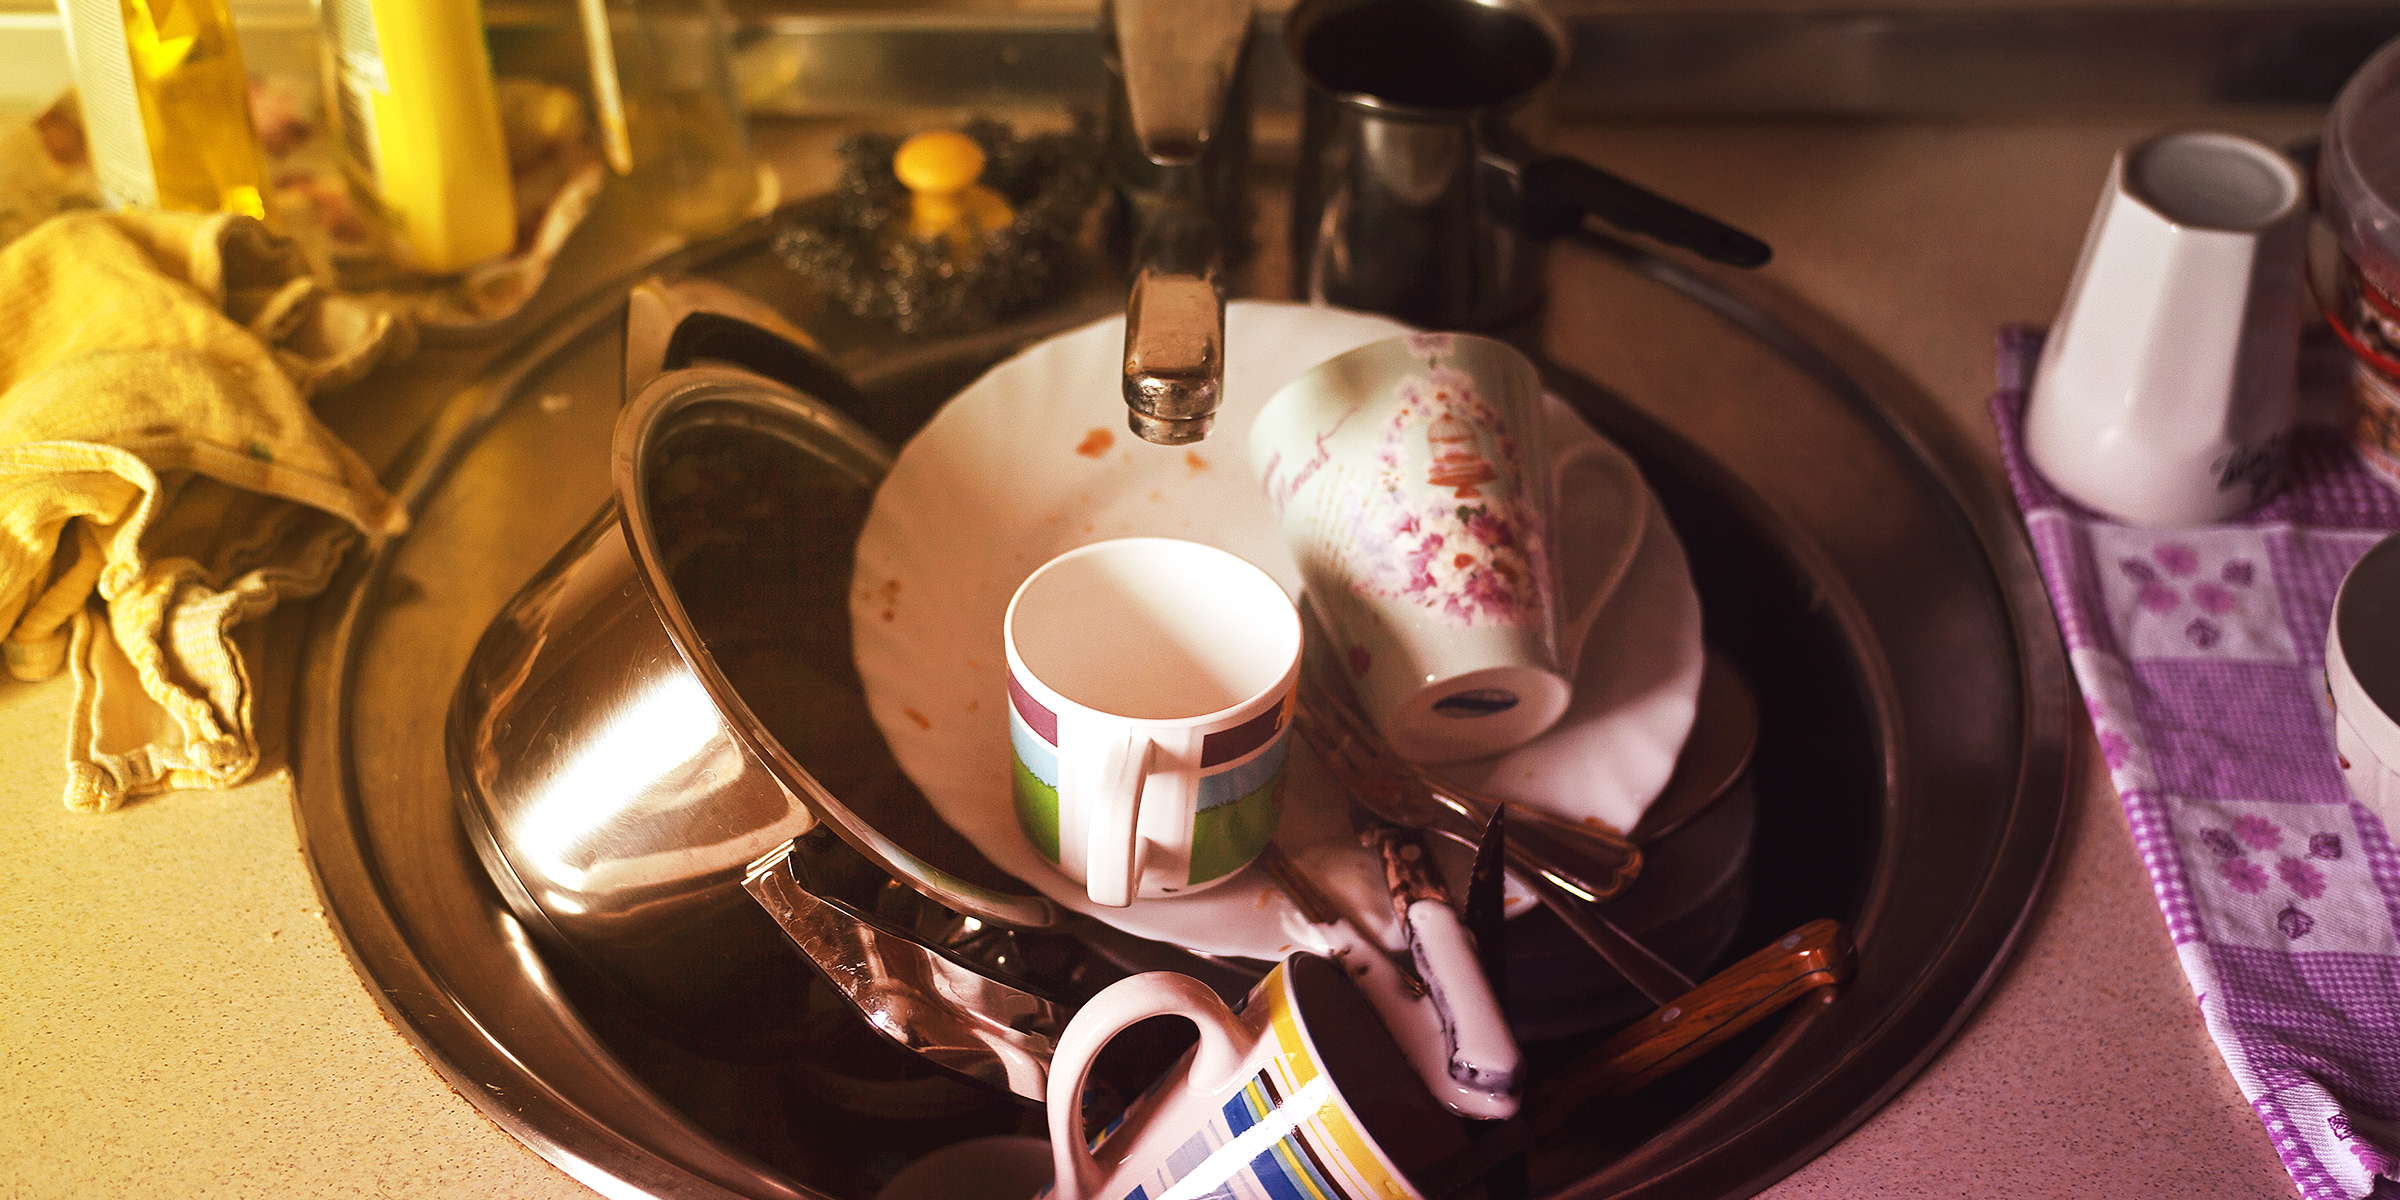 A pile of dishes | Source: Flickr